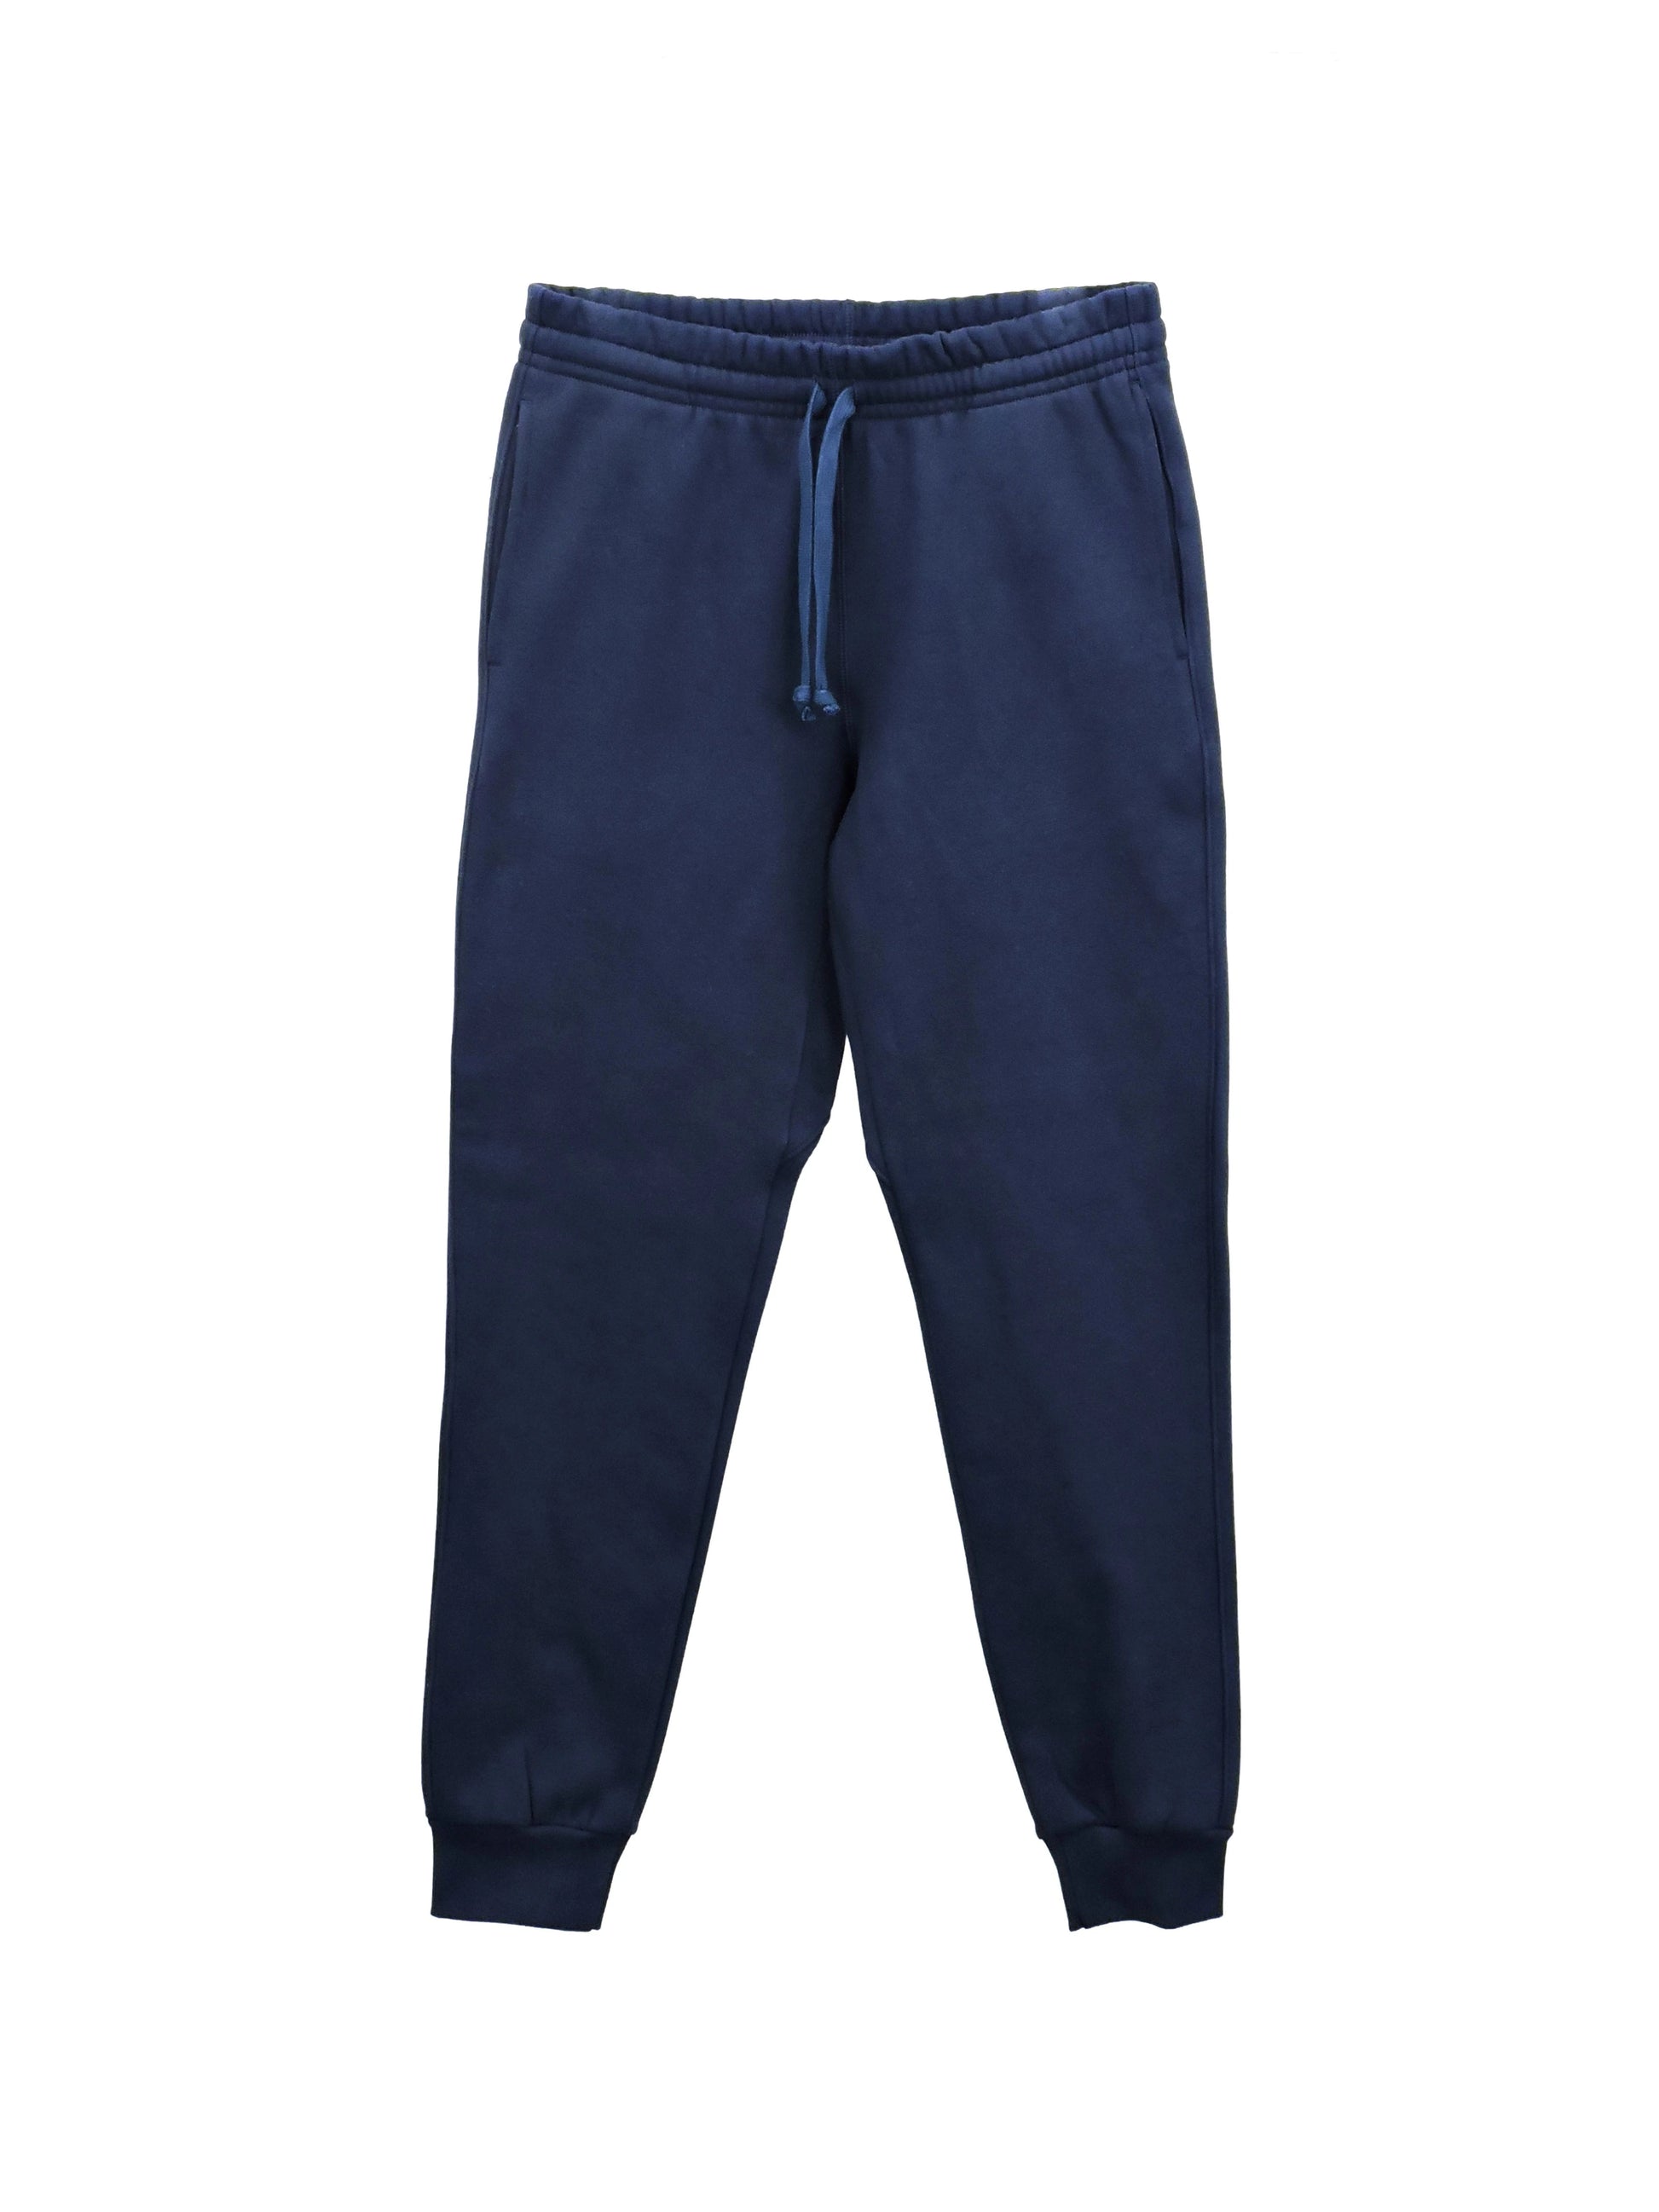 Navy Fleece Jogger with Drawstrings and Two Side Pockets